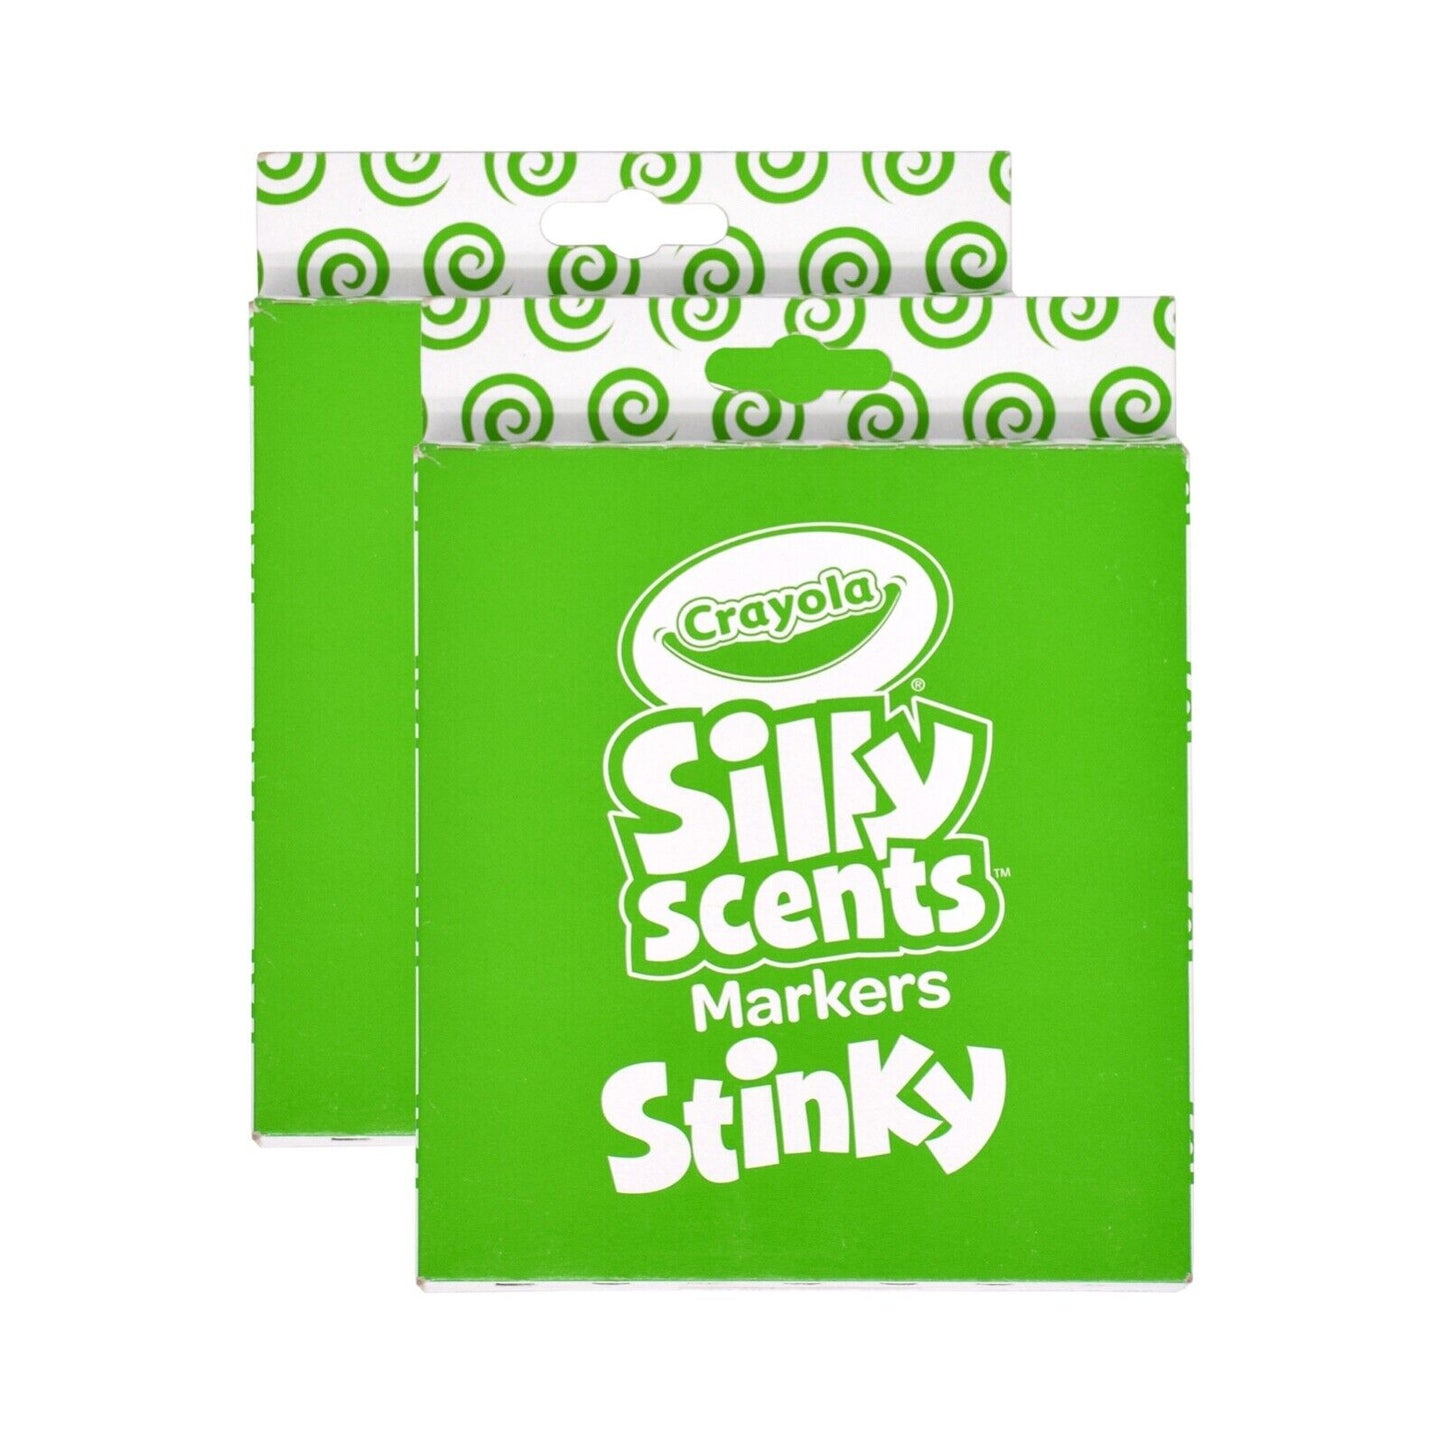 Crayola Silly Scents Markers Stinky 2x8 Pack